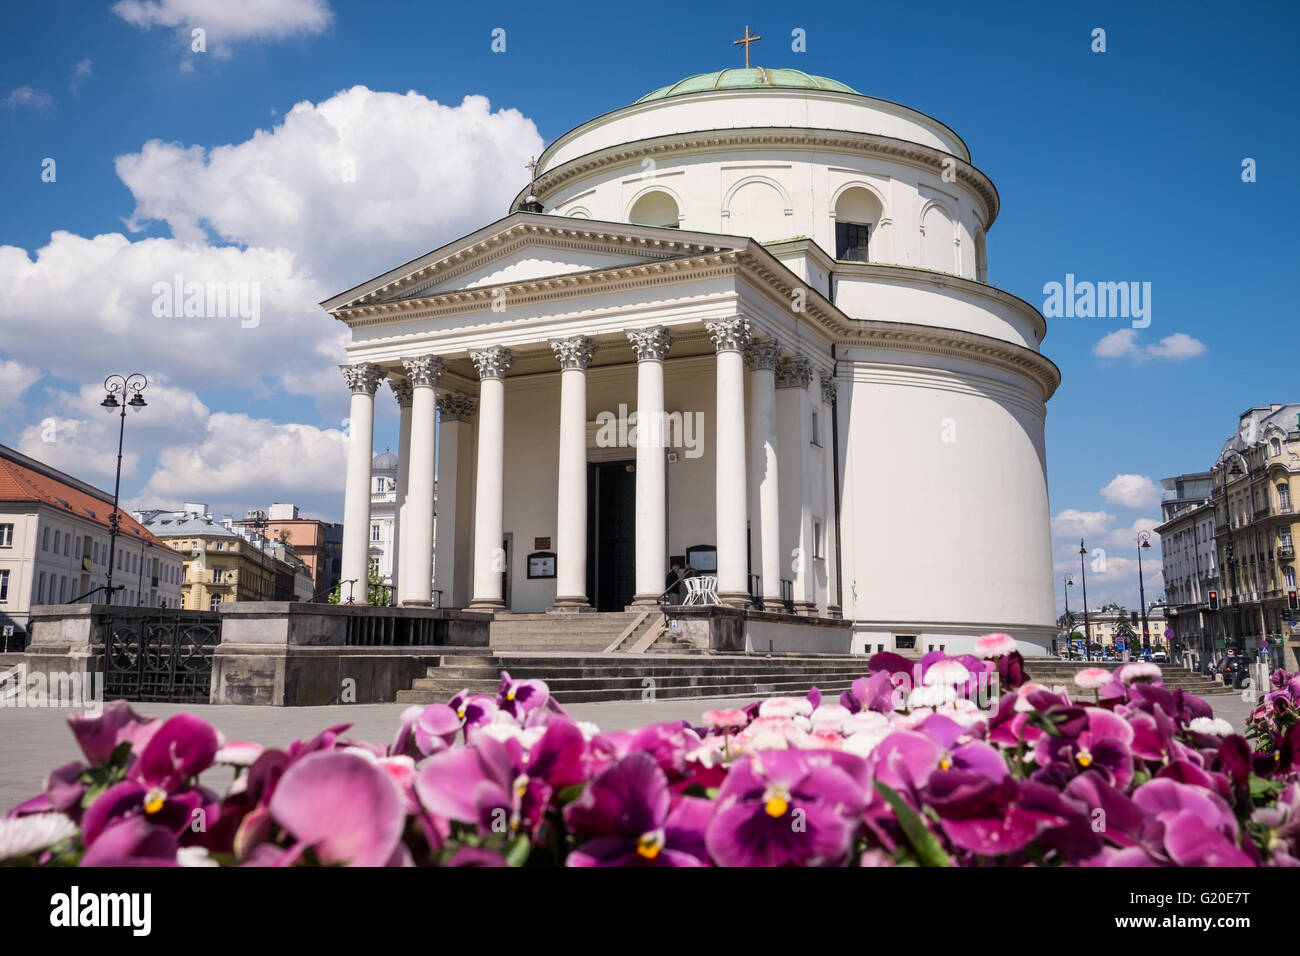 A general view of St. Alexander's Church, Warsaw, Poland. Stock Photo